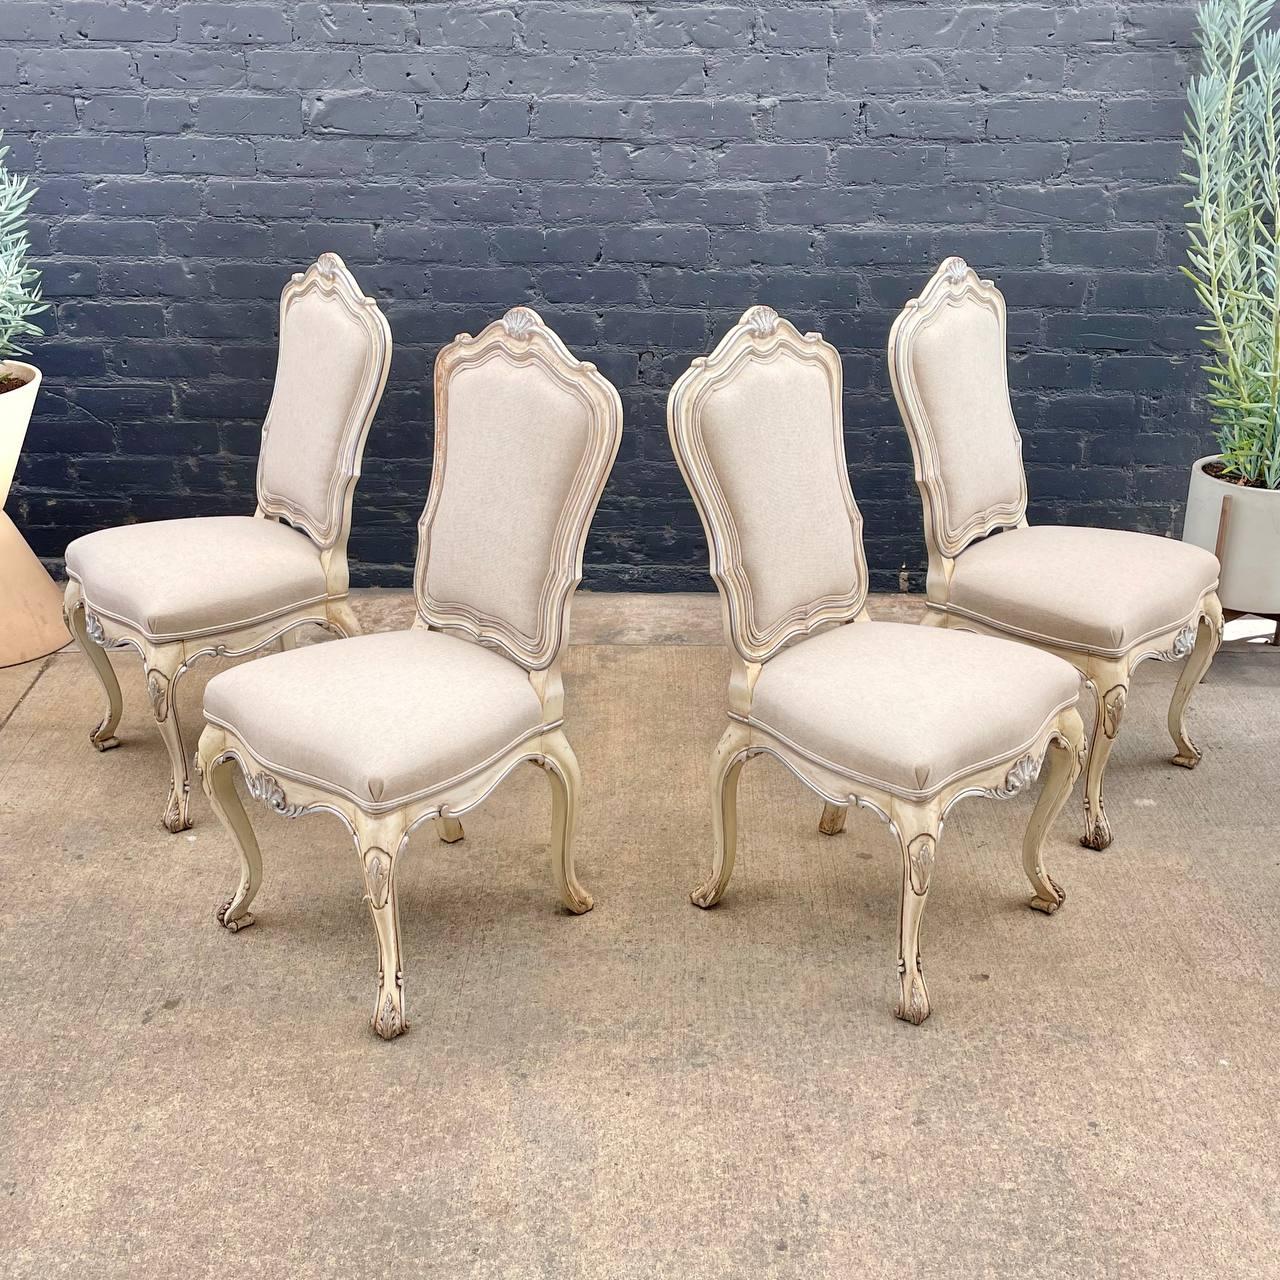 Set of 6 Antique French Louis XVI Dining Chairs 6x In Good Condition For Sale In Los Angeles, CA